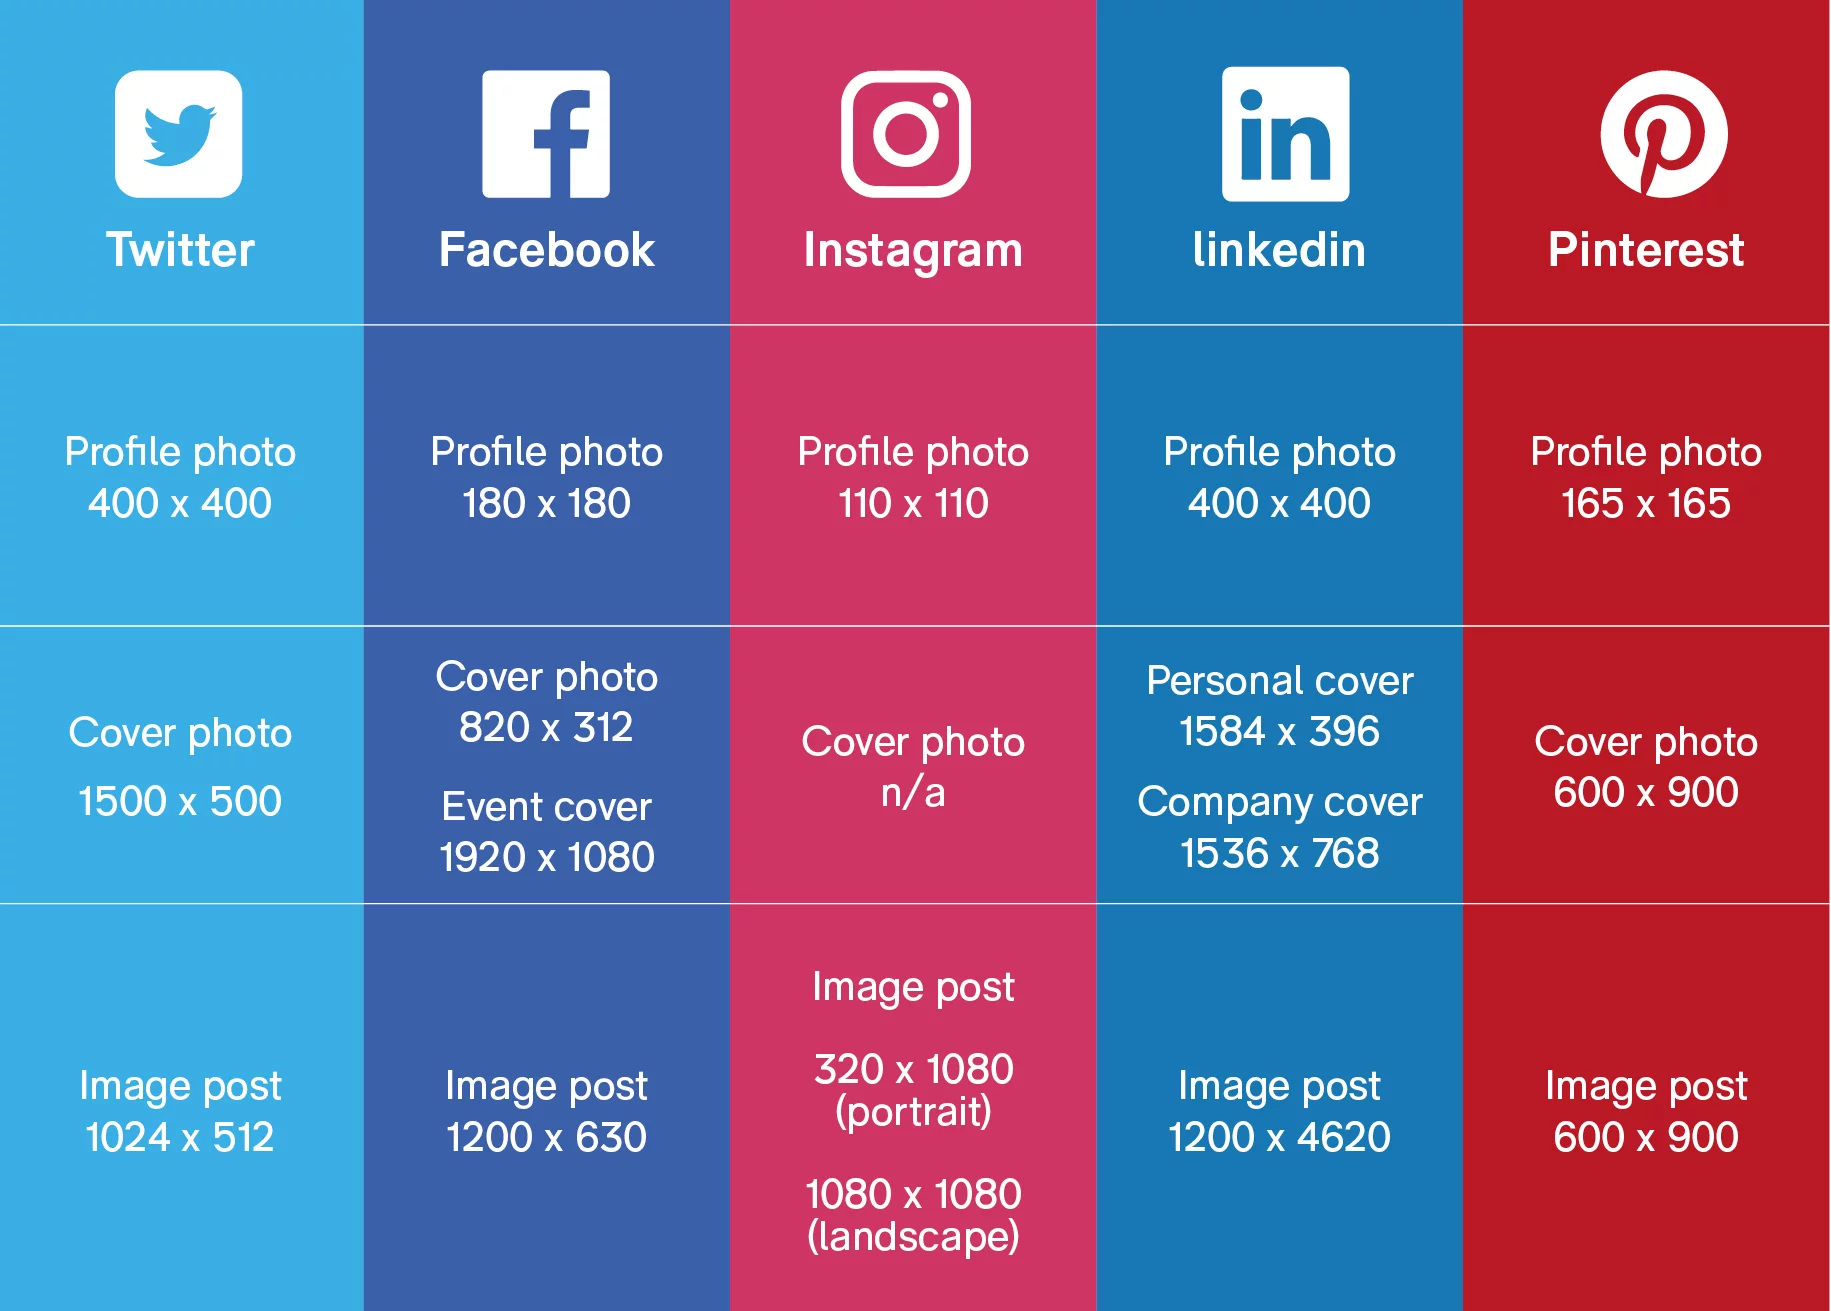 Table showing sizes for every visual format on social media platforms